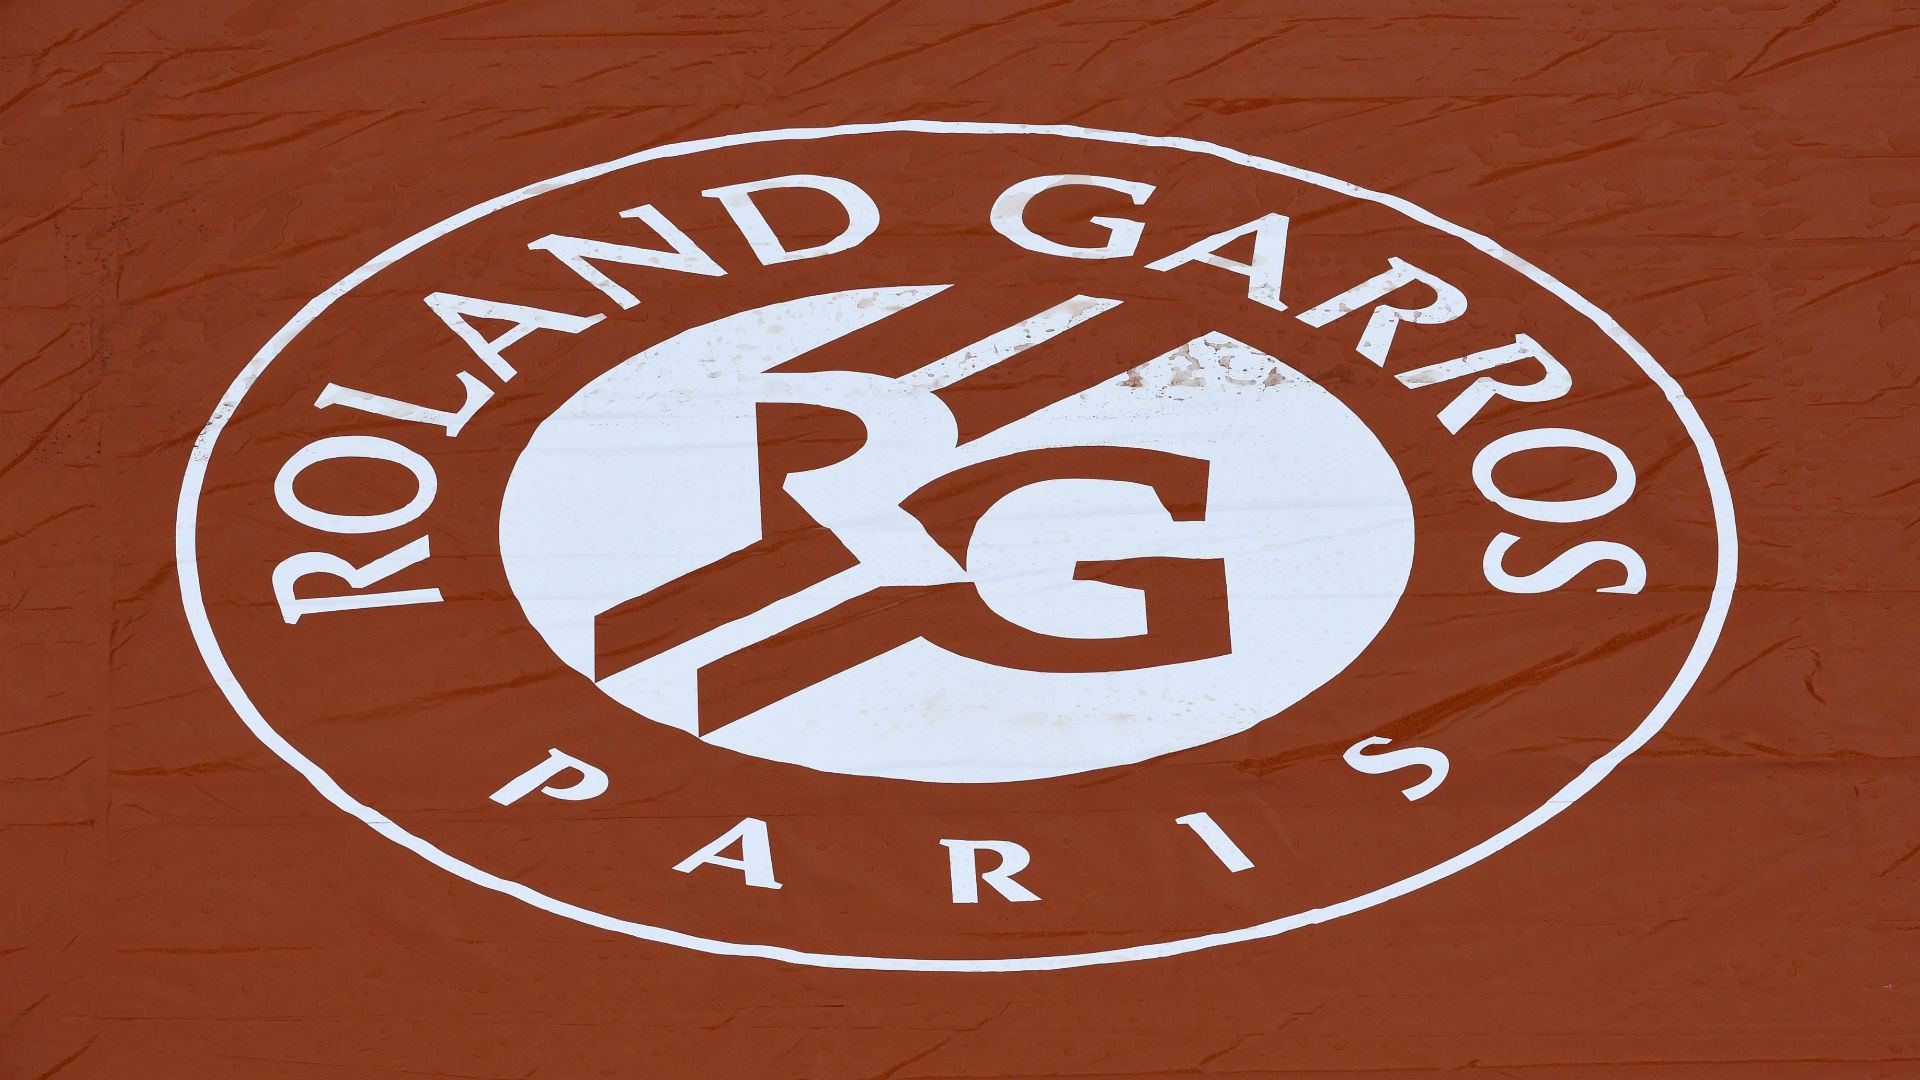 French Open schedule 2020 TV coverage, channels & more to watch every